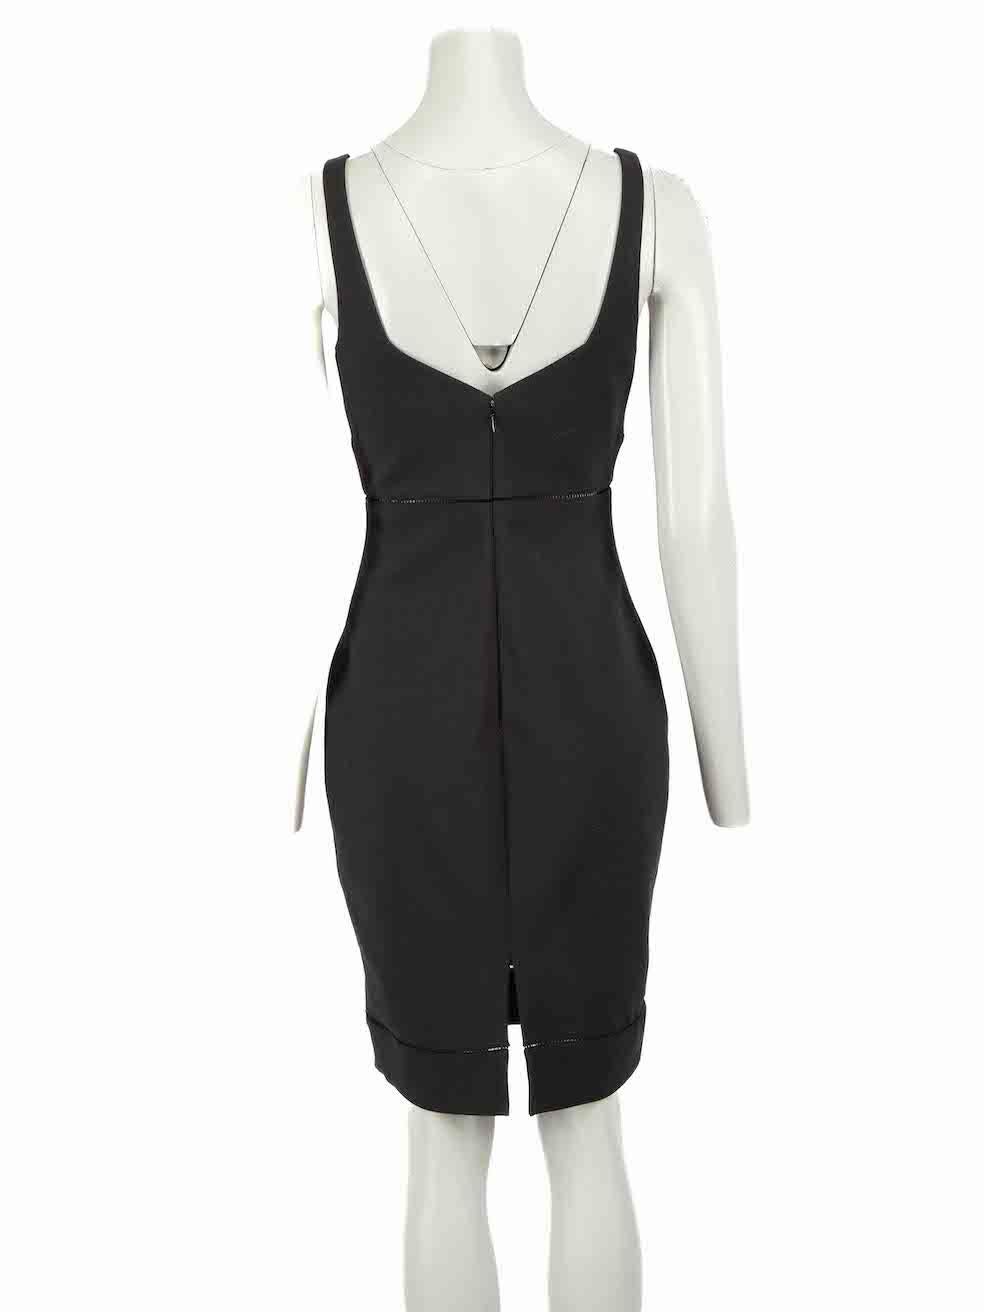 Elizabeth and James Black Plunge Neck Dress Size M In Good Condition For Sale In London, GB